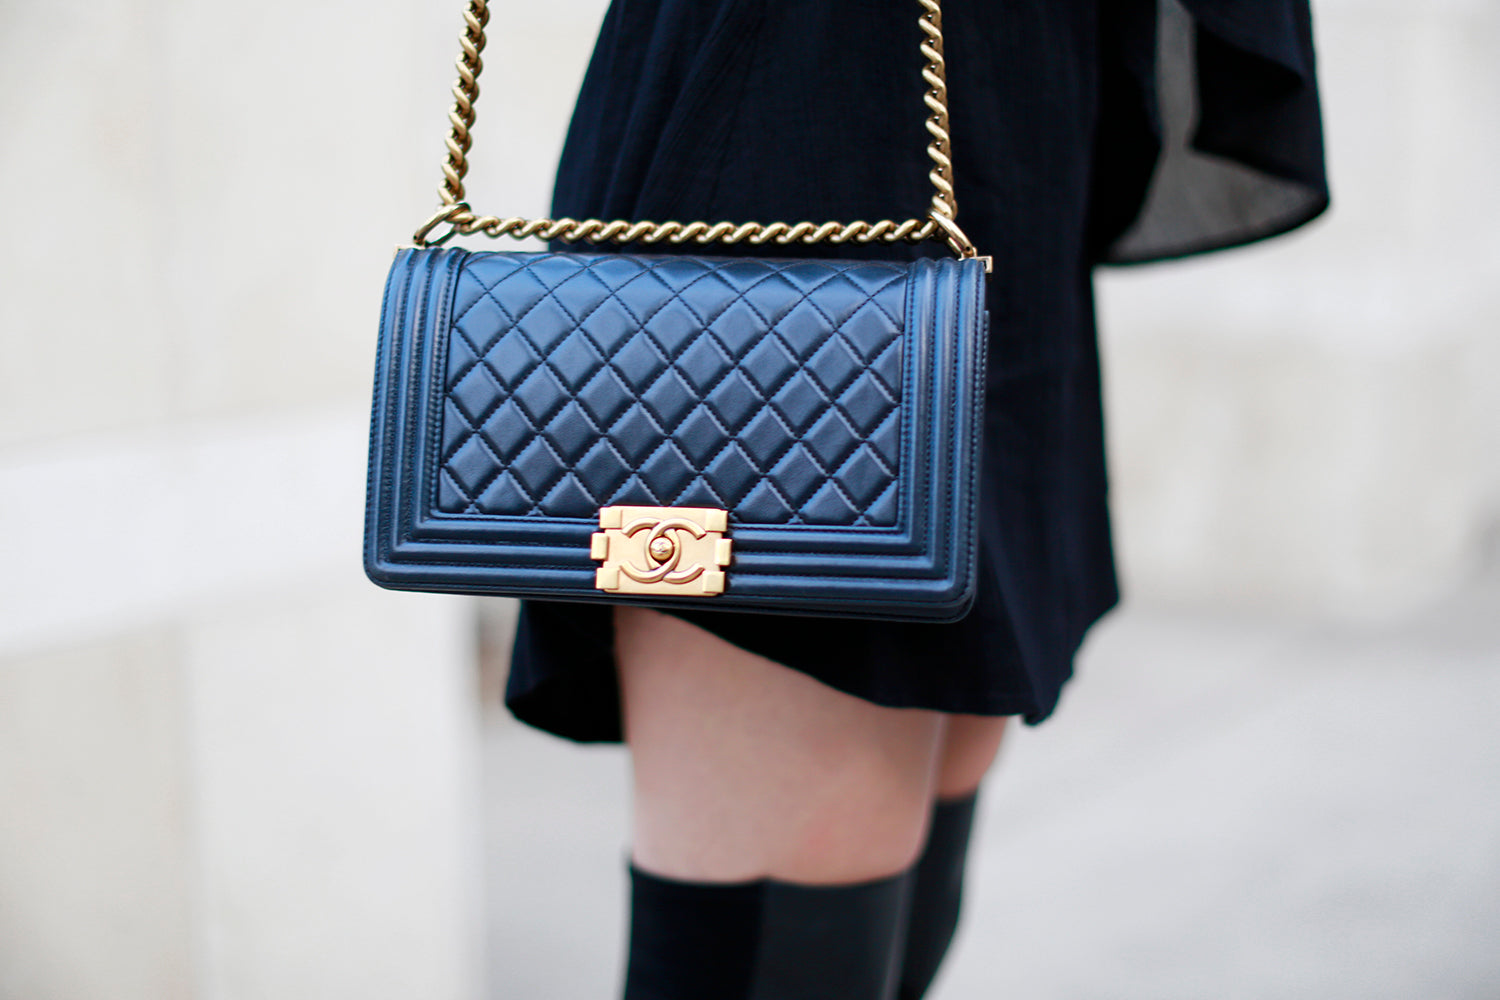 Where Are Popular Chanel Handbags The Cheapest? Chanel Boy Bag